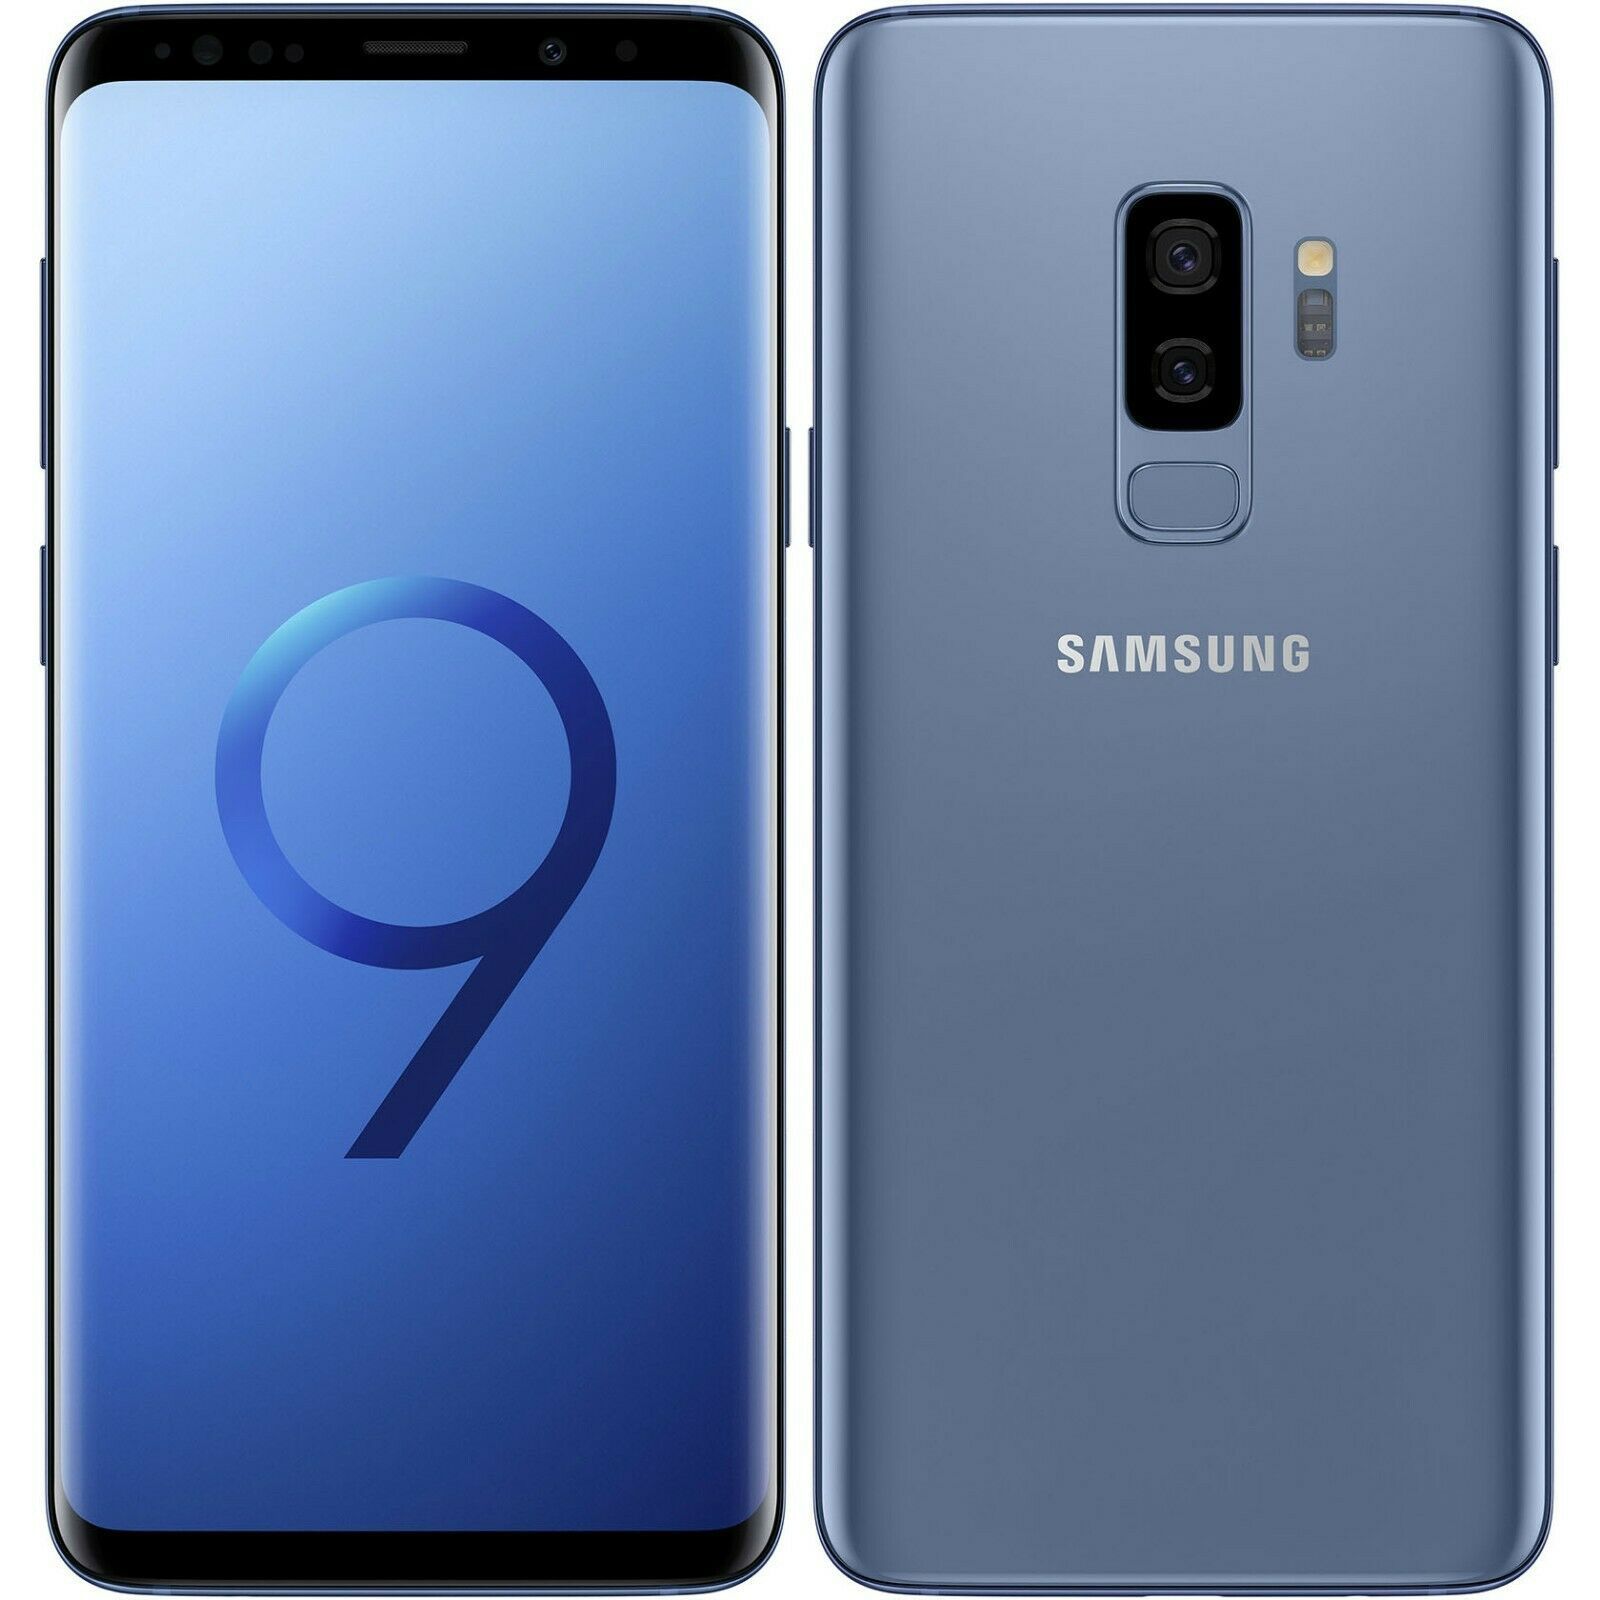 Samsung Galaxy S9 for T-Mobile